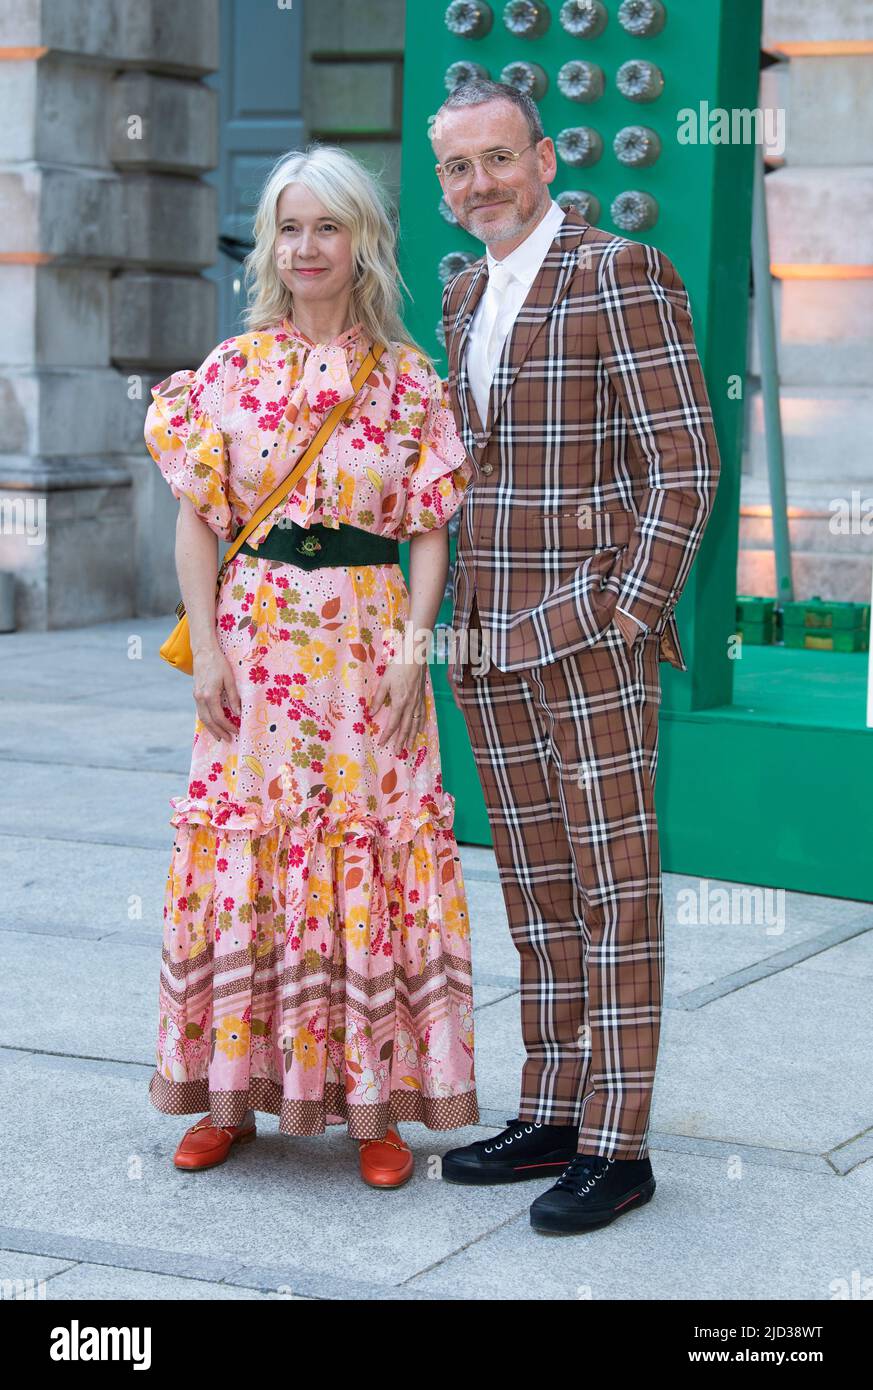 London, UK. Justine Simons and Axel Ruger at The Royal Academy of Arts summer preview party at the Royal Academy of Arts on June 15, 2022 in London, England. Ref: LMK386-J8163-160622 Gary Mitchell /Landmark Media   WWW.LMKMEDIA.COM. Stock Photo